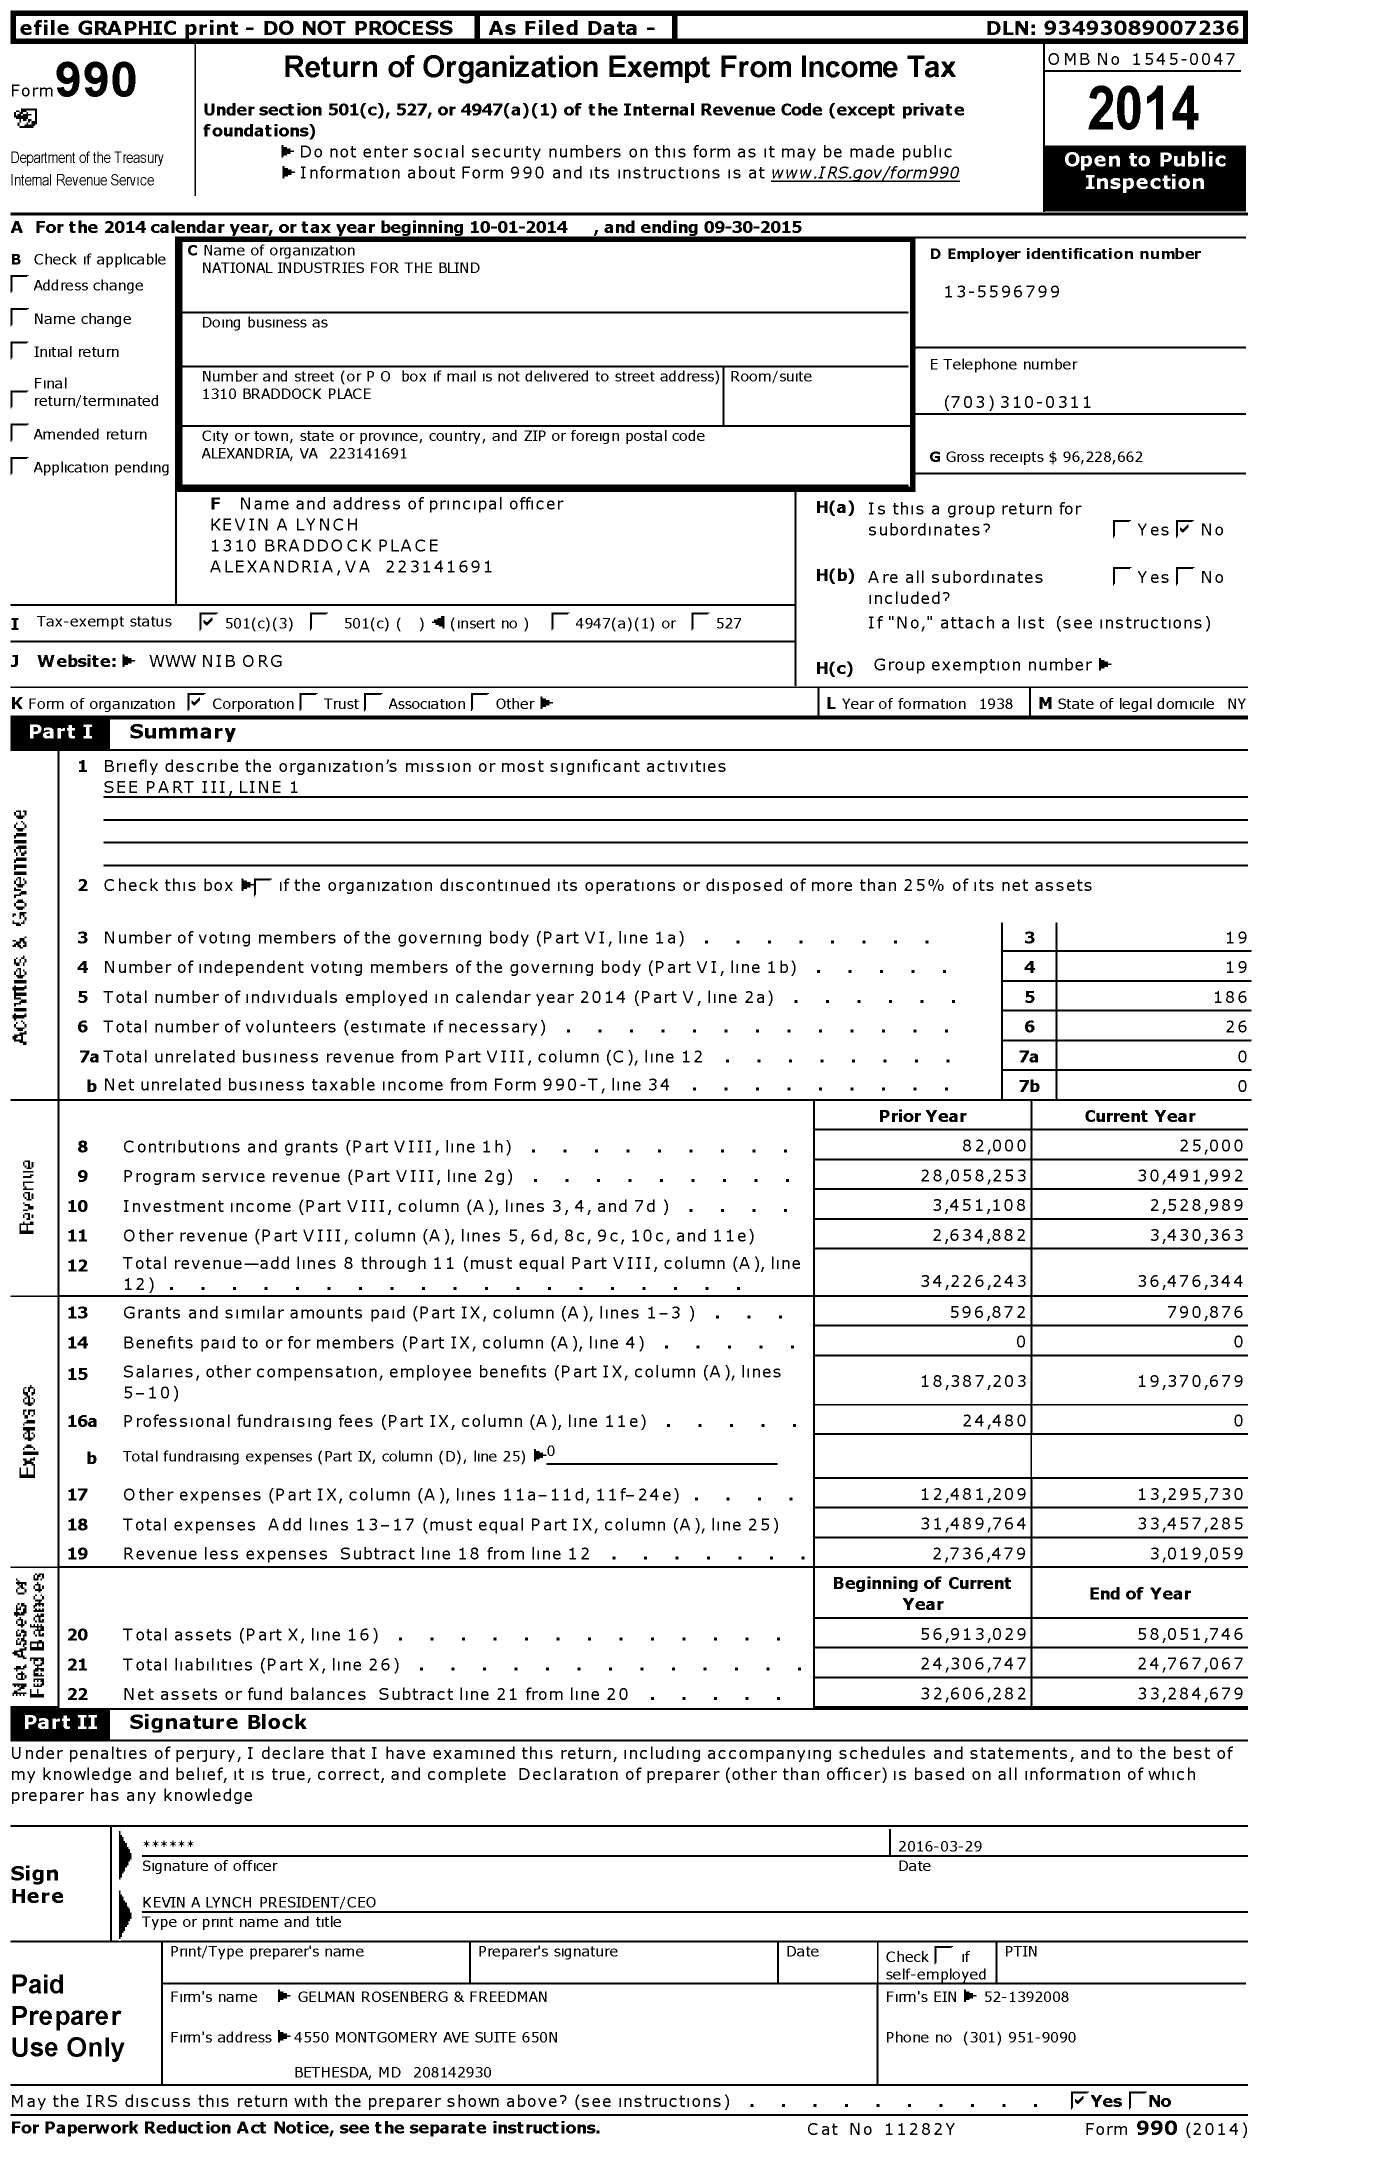 Image of first page of 2014 Form 990 for National Industries for the Blind